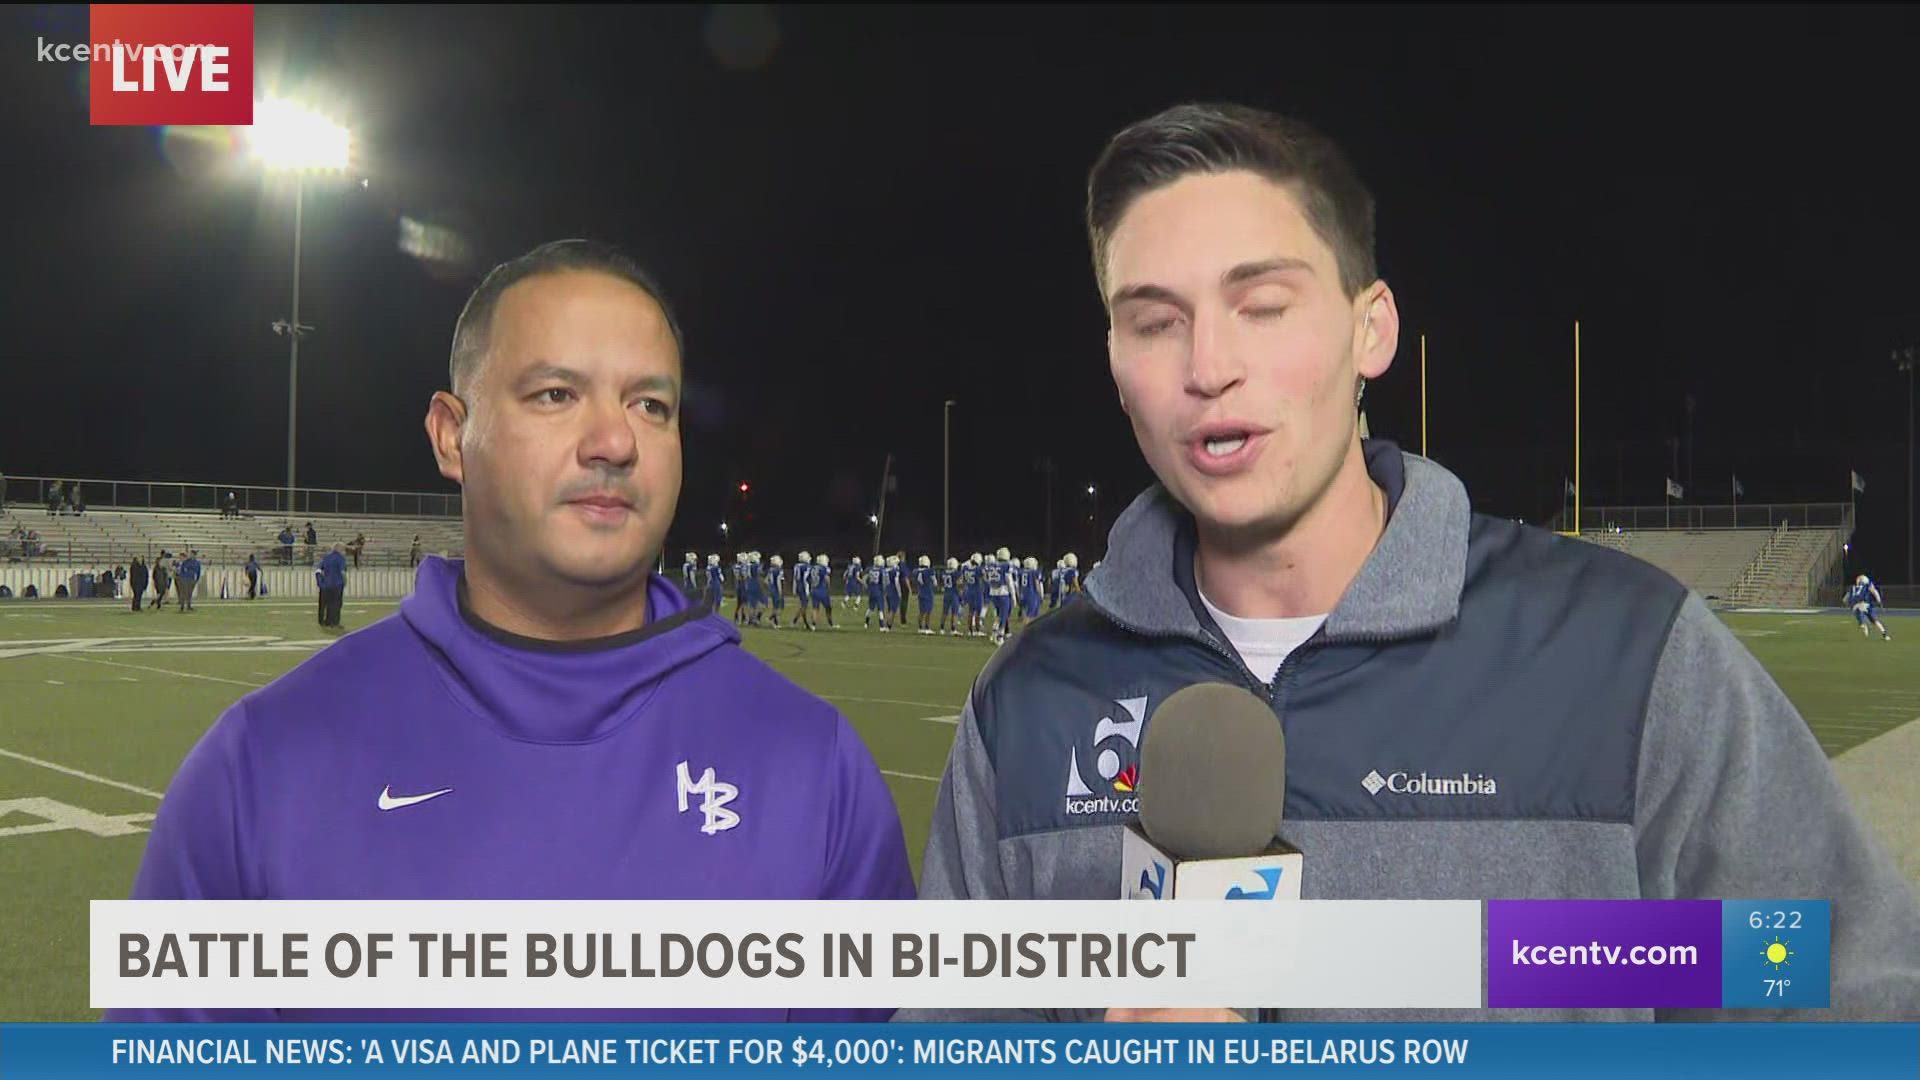 Game of the week: Battle of the Bulldogs. Matt Lively with more.